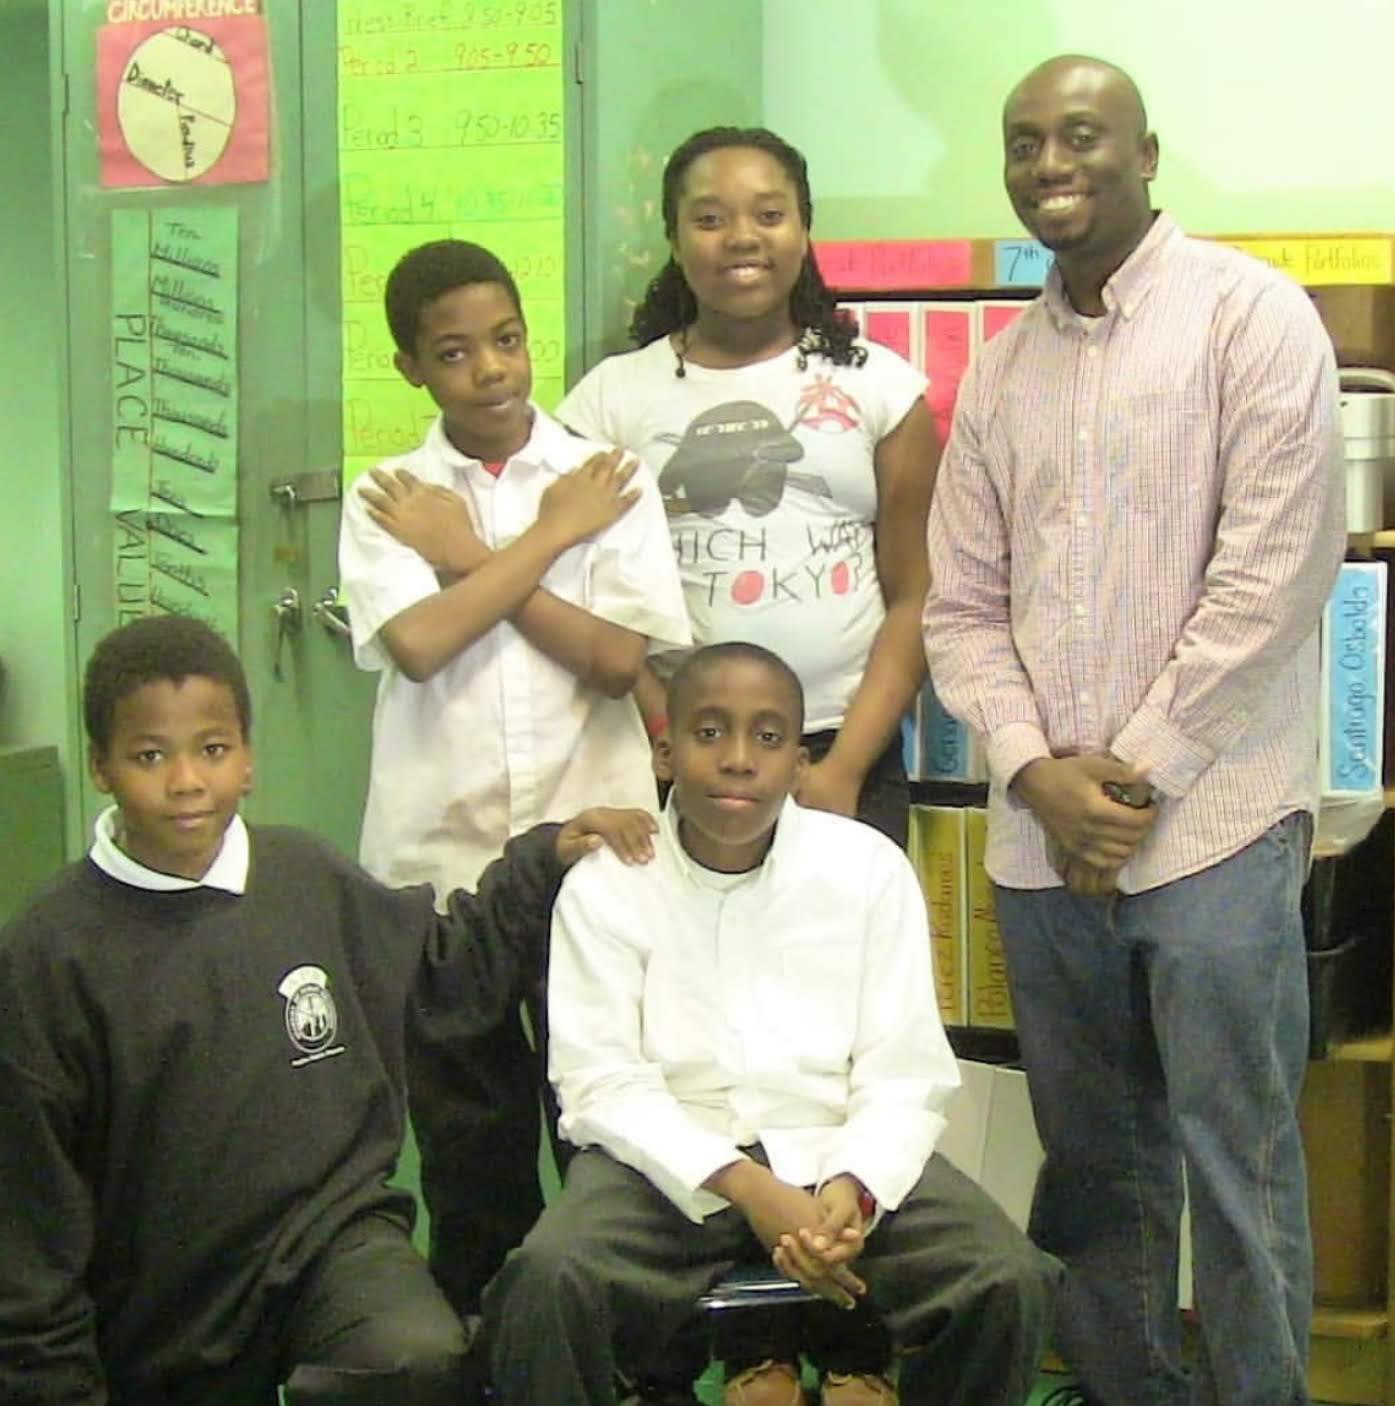 Four after school program students take a photo during journalism class with their instructor.